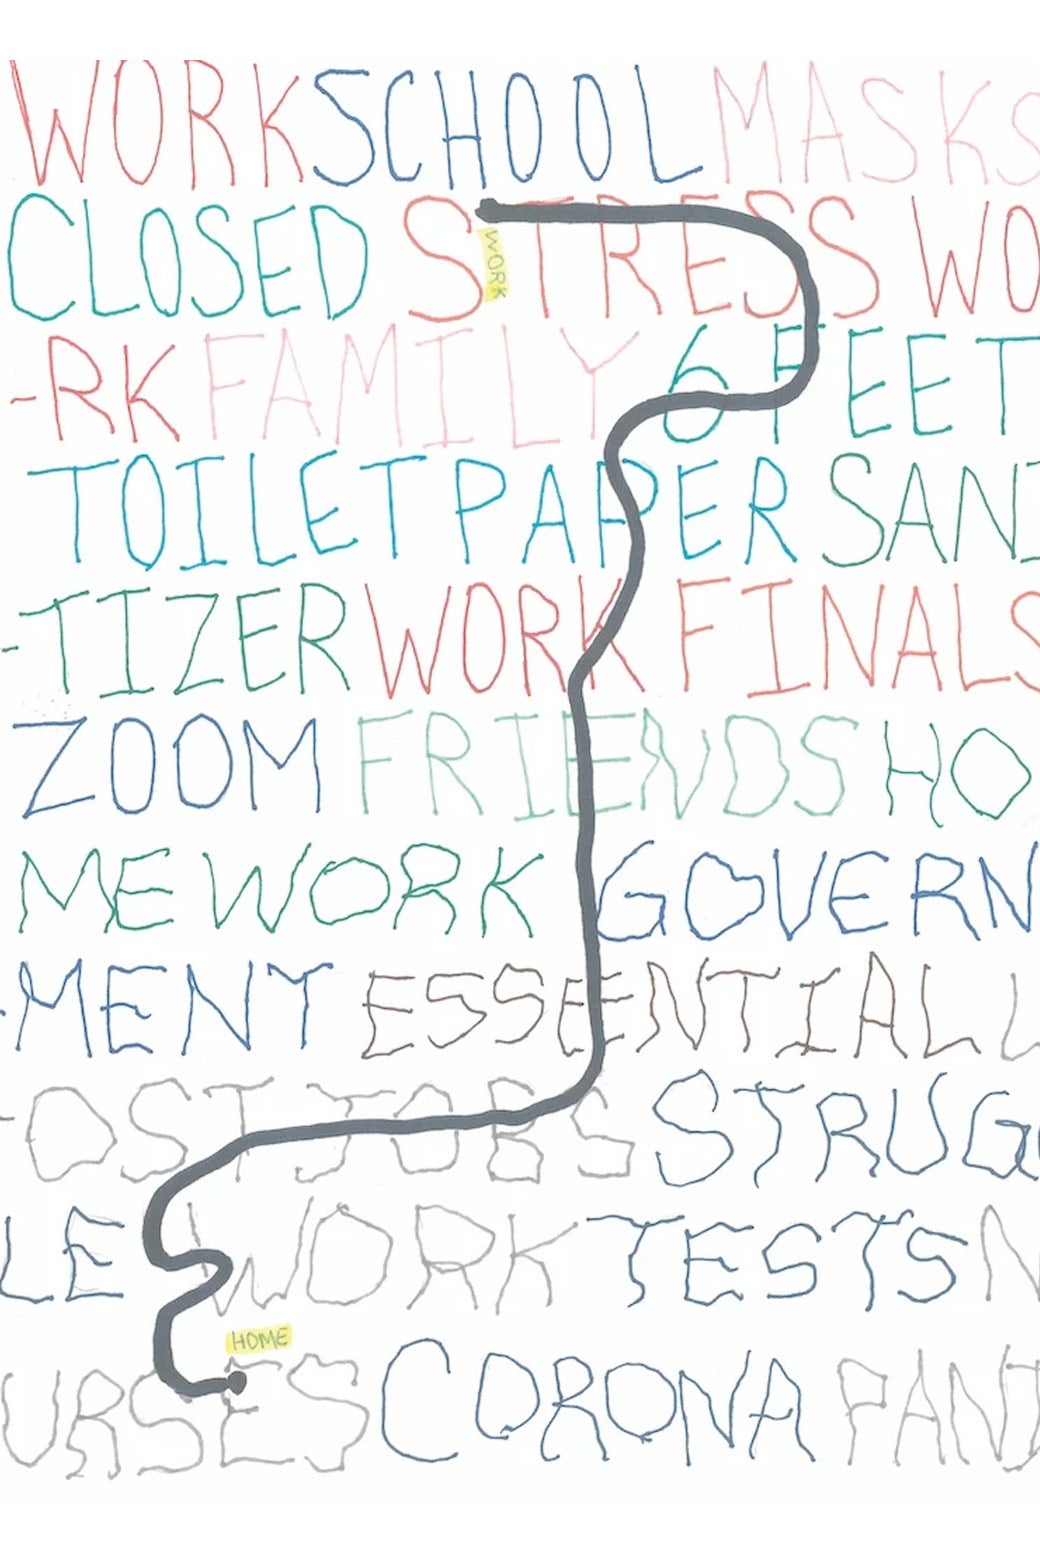 A black line superimposed on words reading: "WORK SCHOOL MASKS CLOSED STRESS WORK FAMILY 6 FEET TOILET PAPER SANITIZER WORK FINALS ZOOM FRIENDS HOMEWORK GOVERNMENT ESSENTIAL LOST JOBS STRUGGLE WORK TESTS NURSES CORONA PANIC”